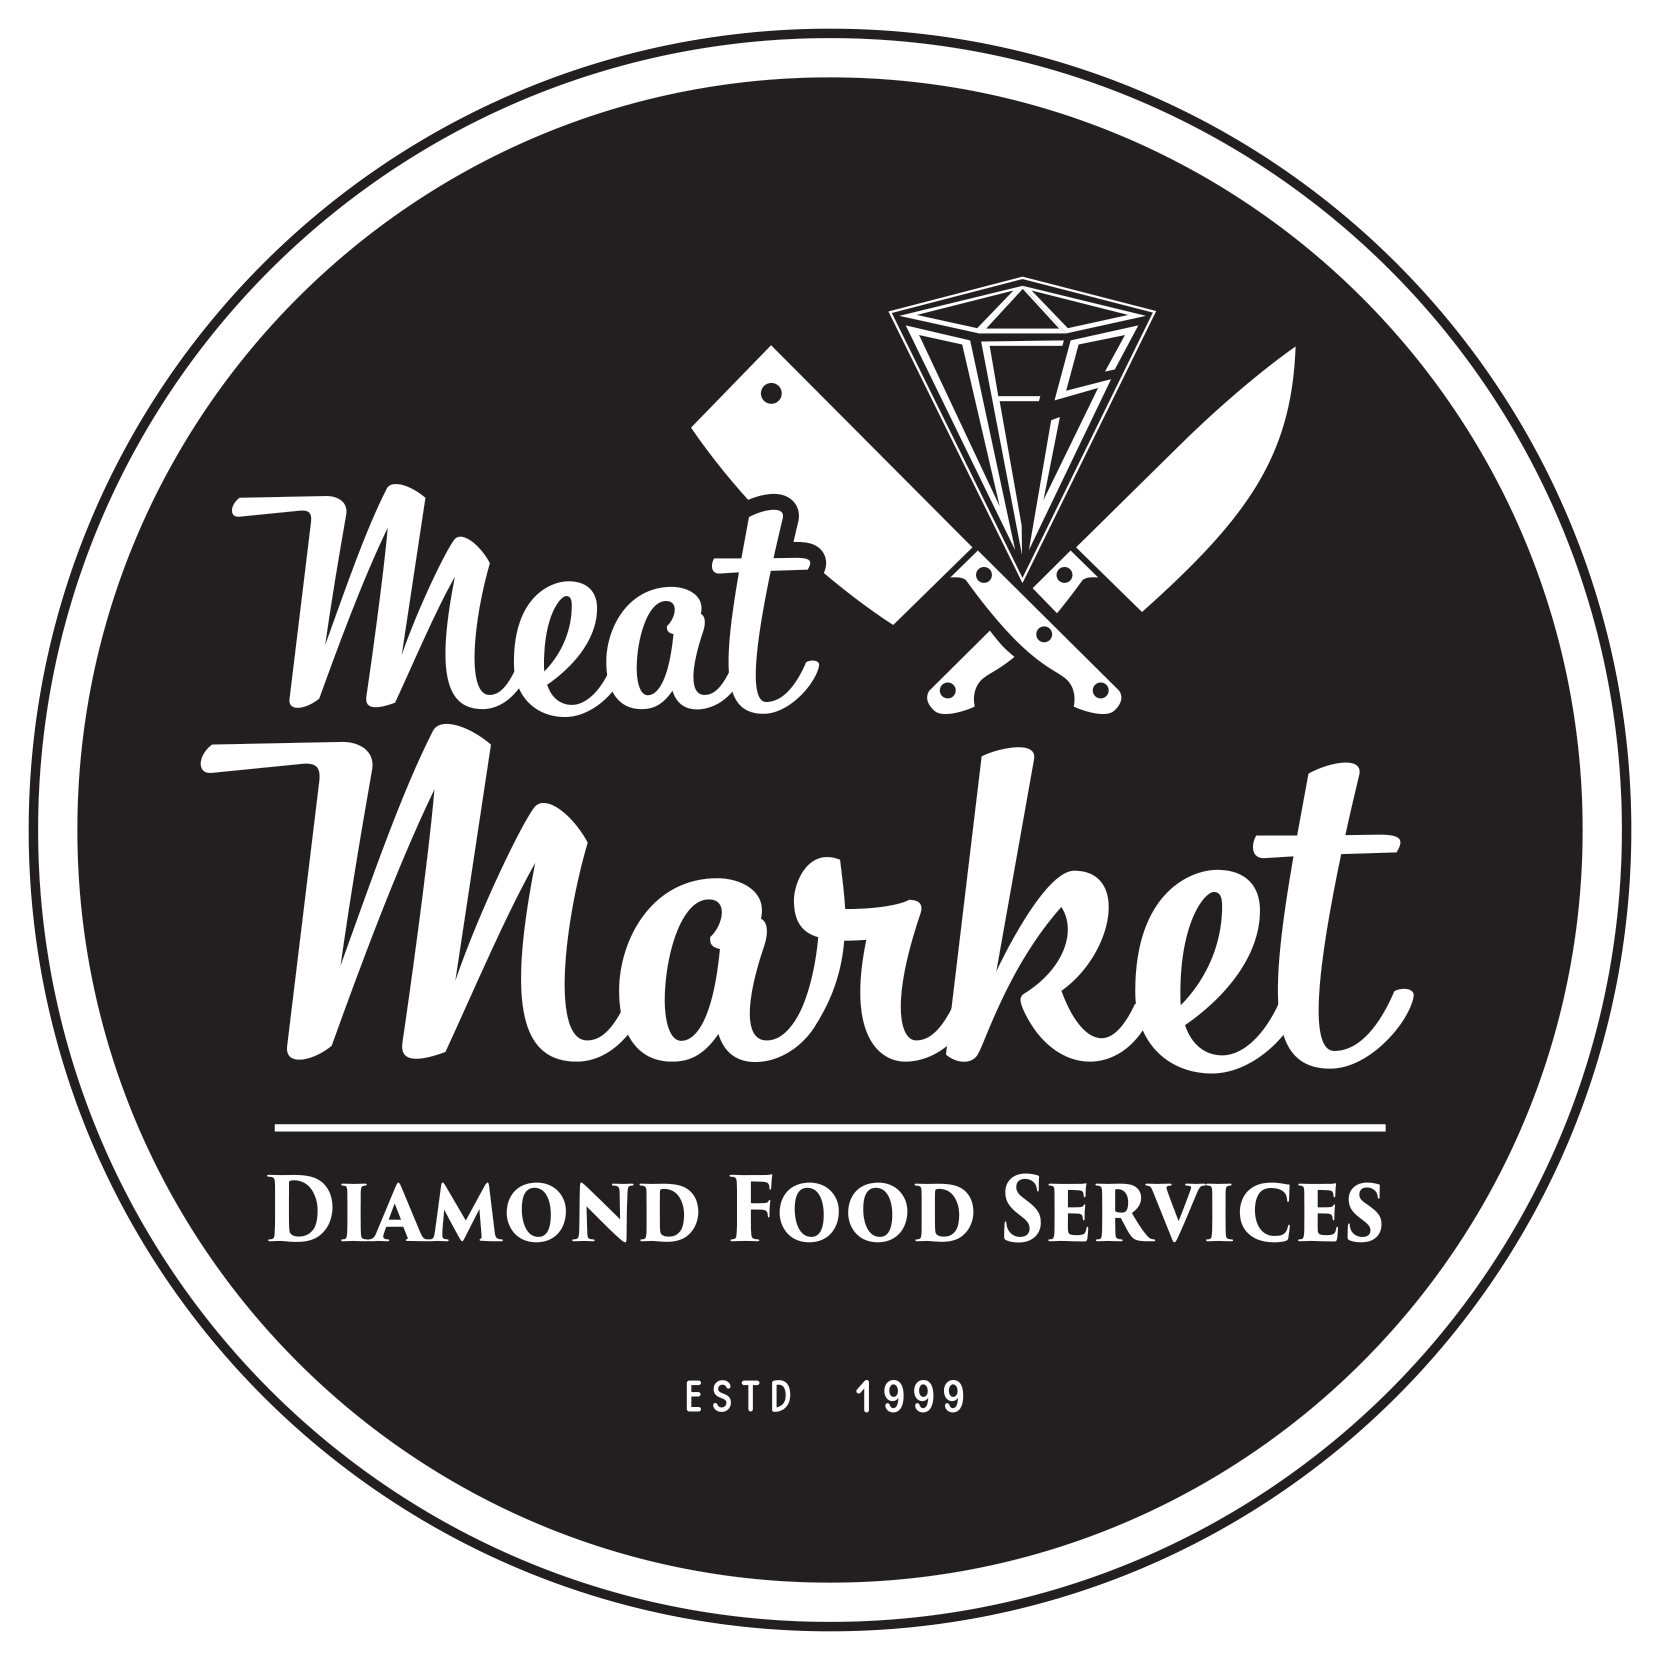 Diamond Food Services | Wholesale Fresh Meat | Lamb Specialists